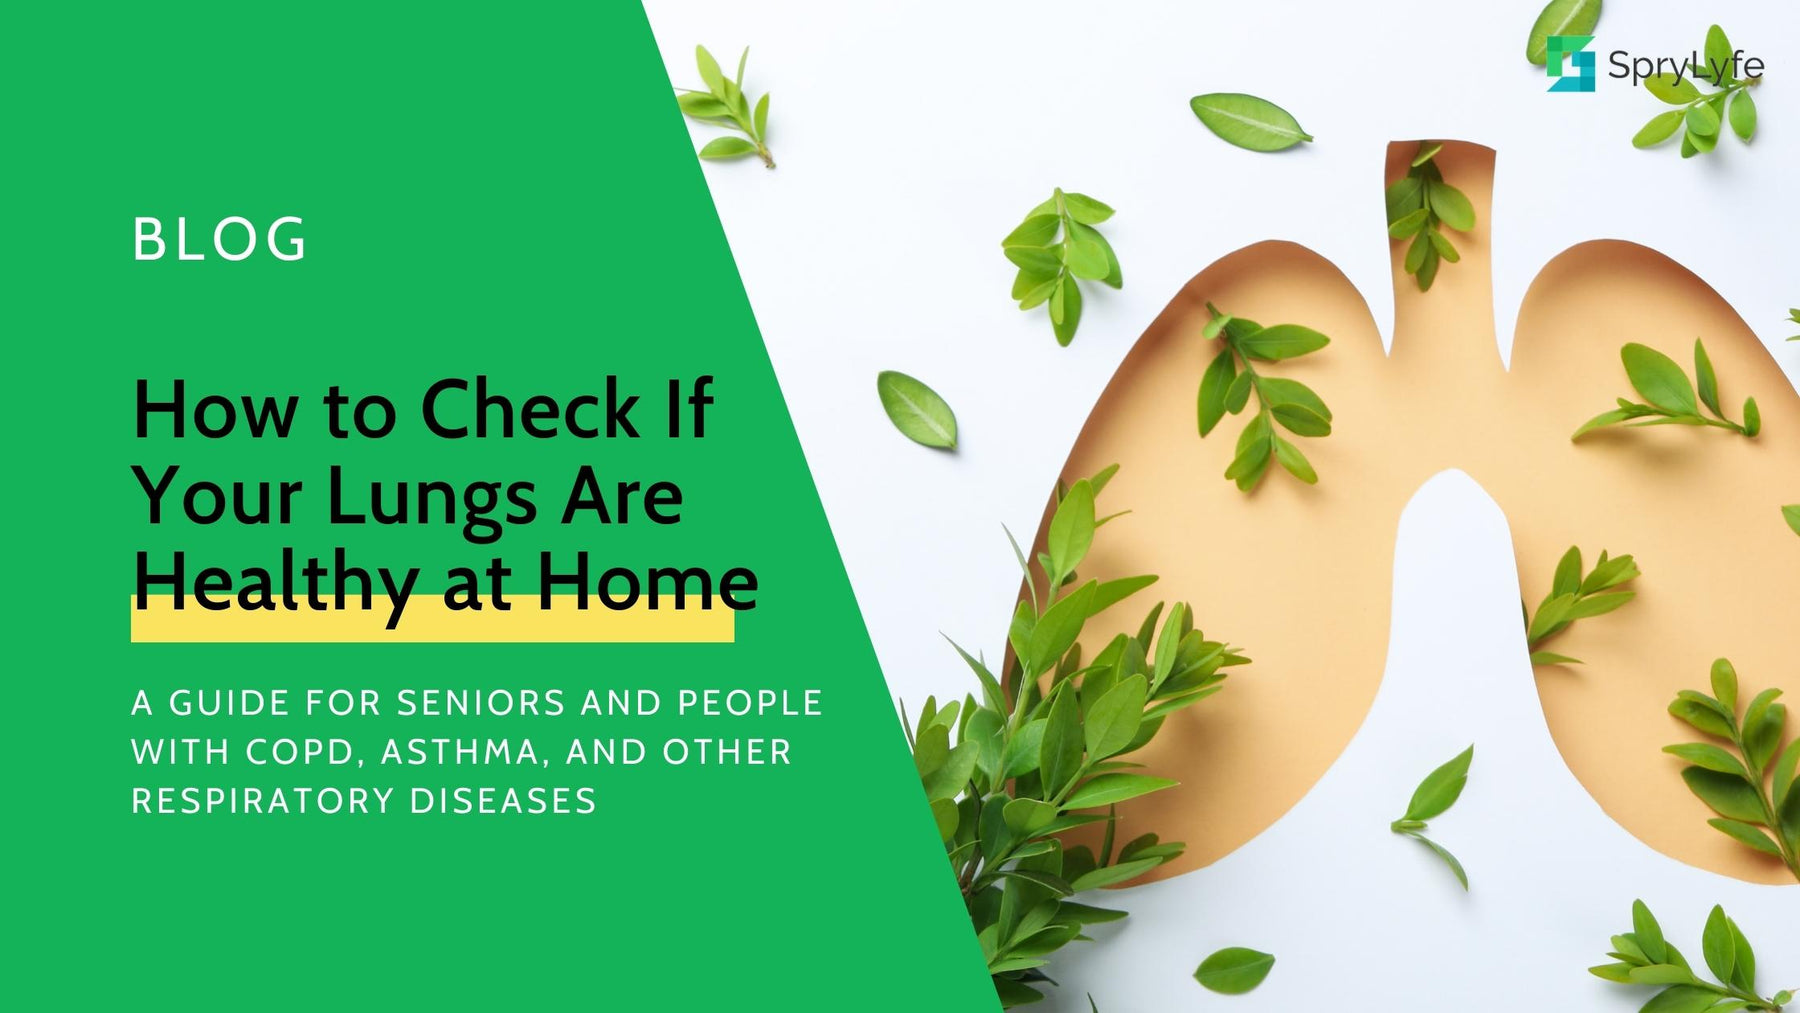 How to Check If Your Lungs Are Healthy at Home: A Guide for Seniors and People with COPD, Asthma, and Other Respiratory Diseases